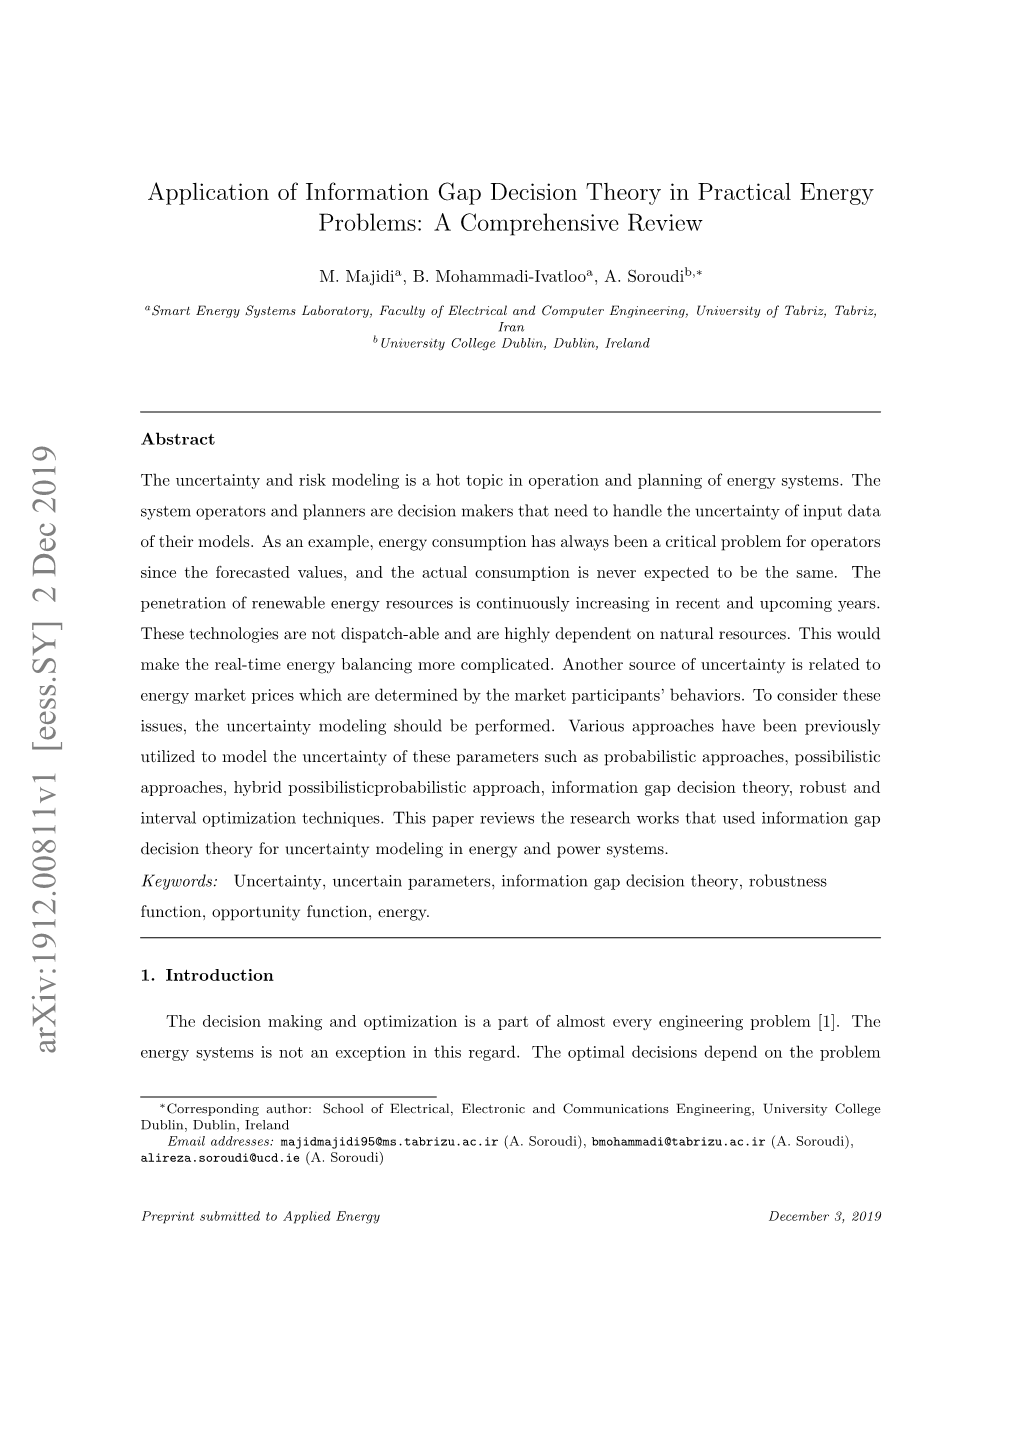 Application of Information Gap Decision Theory in Practical Energy Problems: a Comprehensive Review